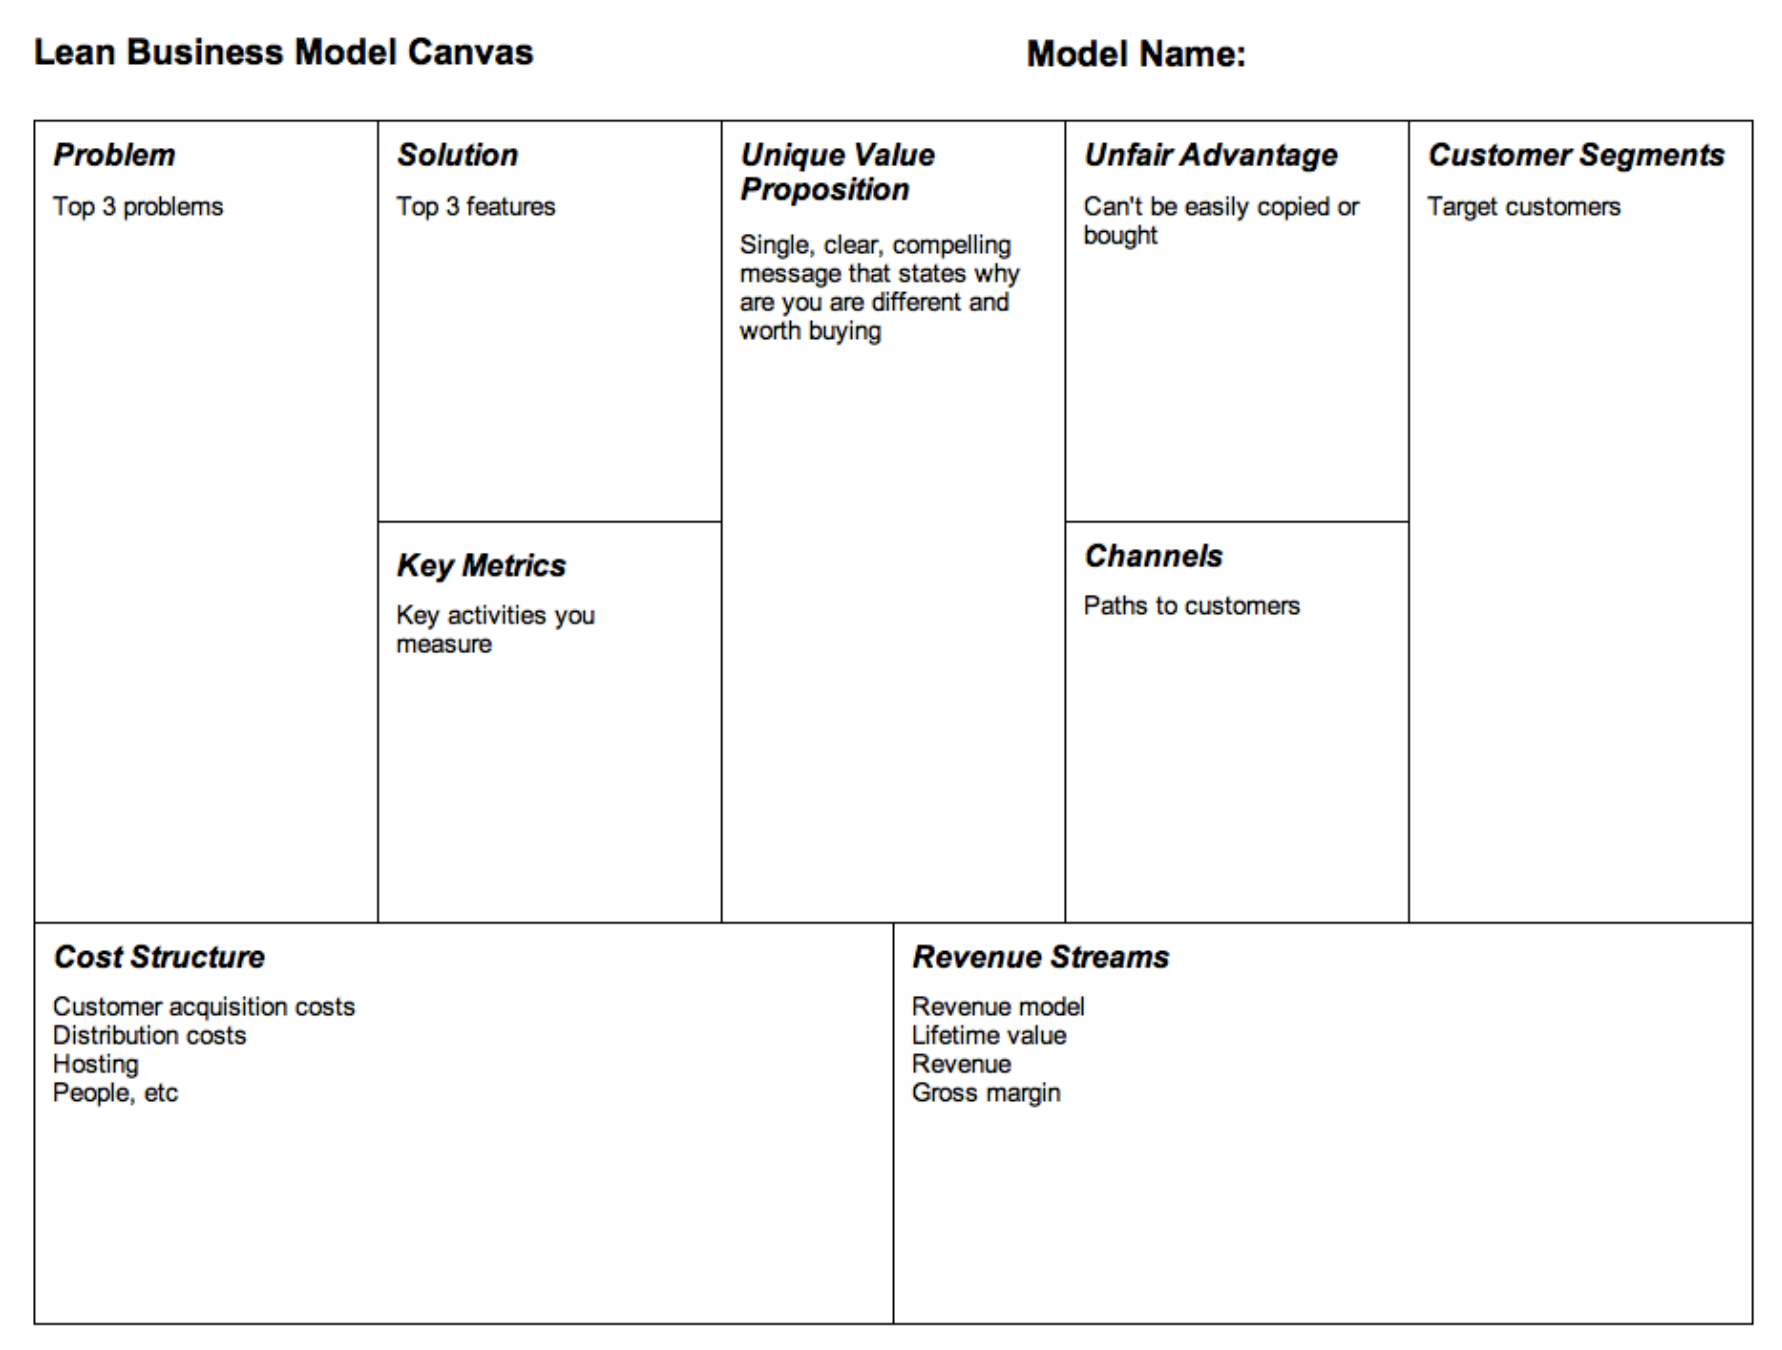 Lean Business Model Canvas | Pdf | Startup Business Plan For Lean Canvas Word Template